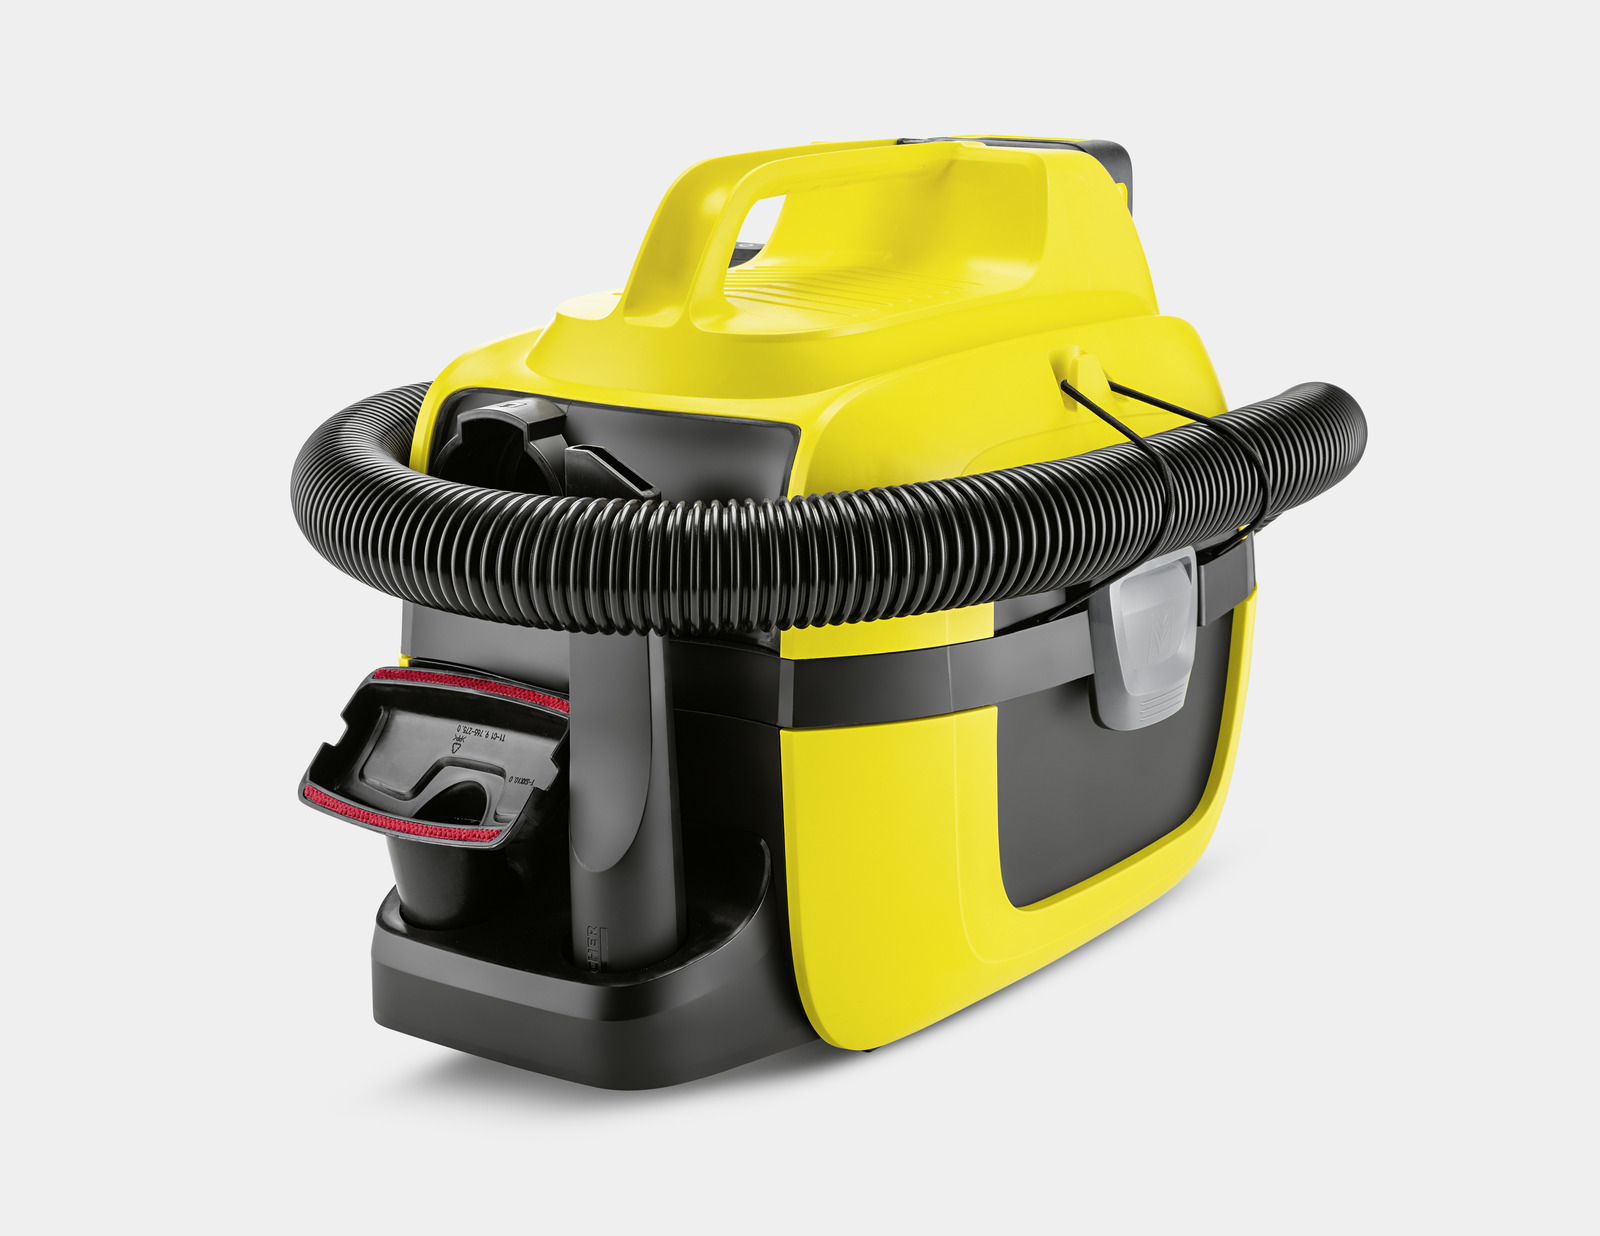 Karcher Wet & Dry WD1 Battery Vacuum Review